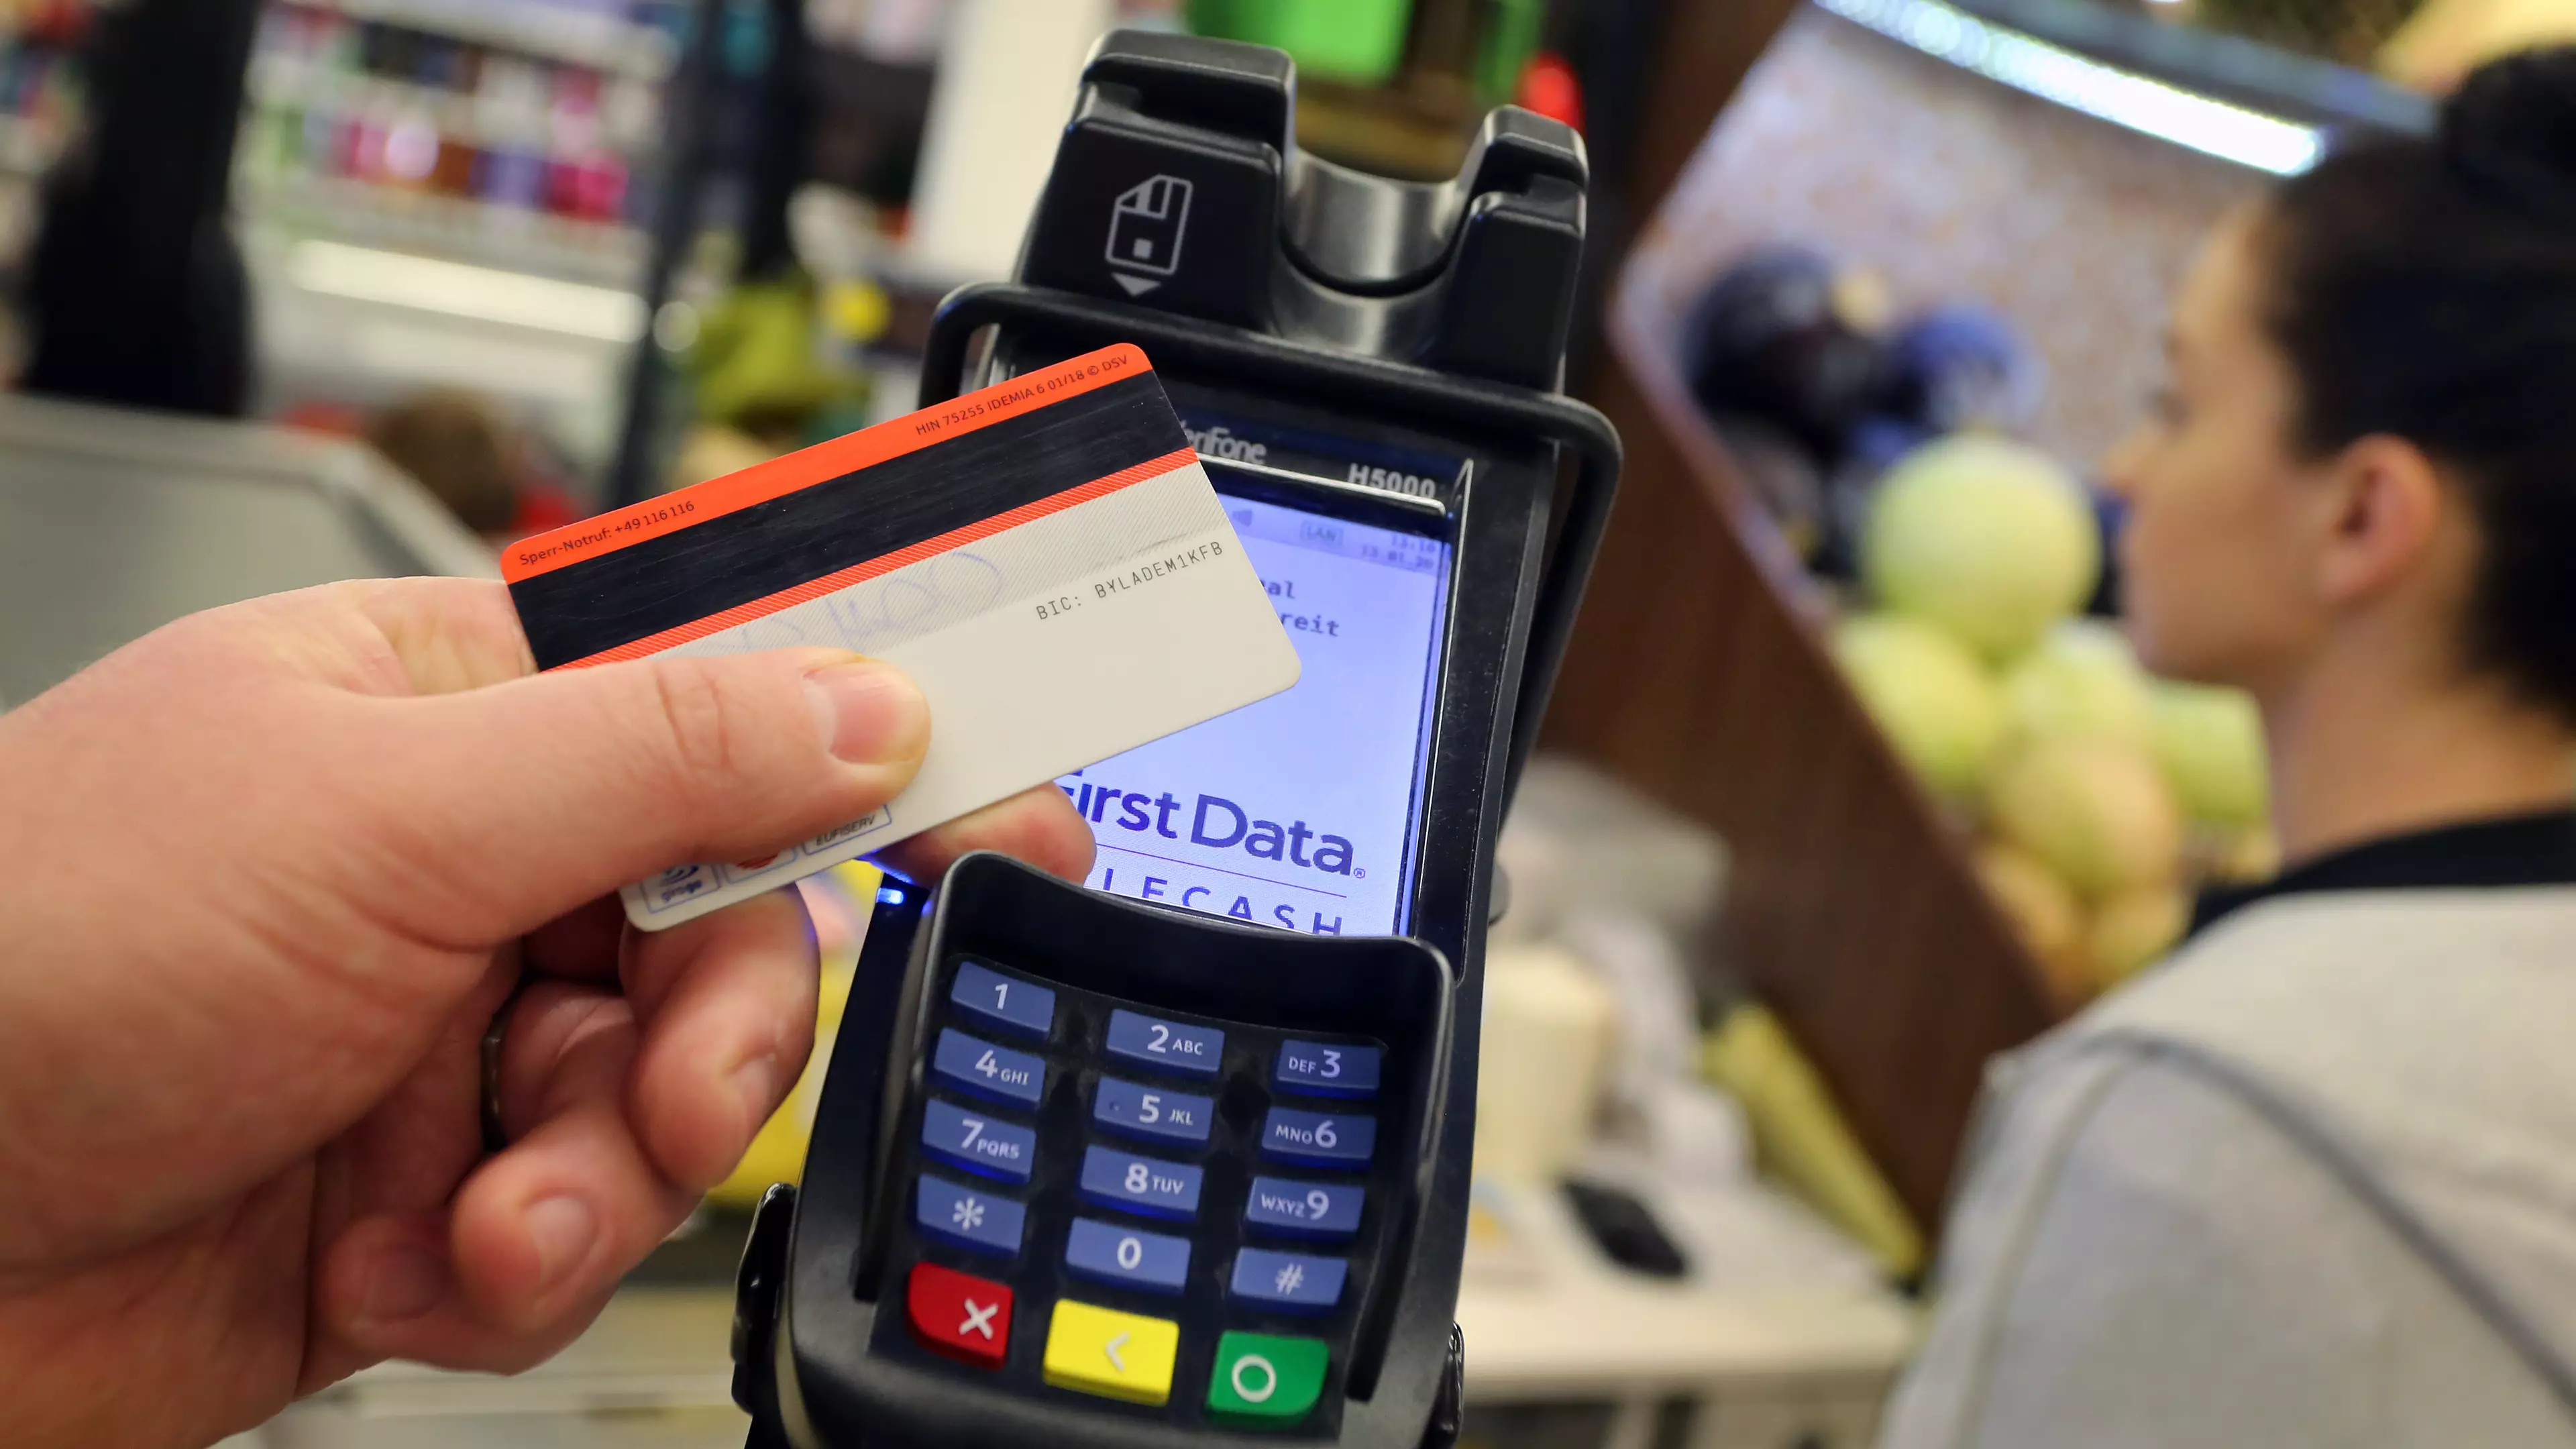 Contactless Payments Up To £45 Allowed To Minimise Unnecessary Physical Contact